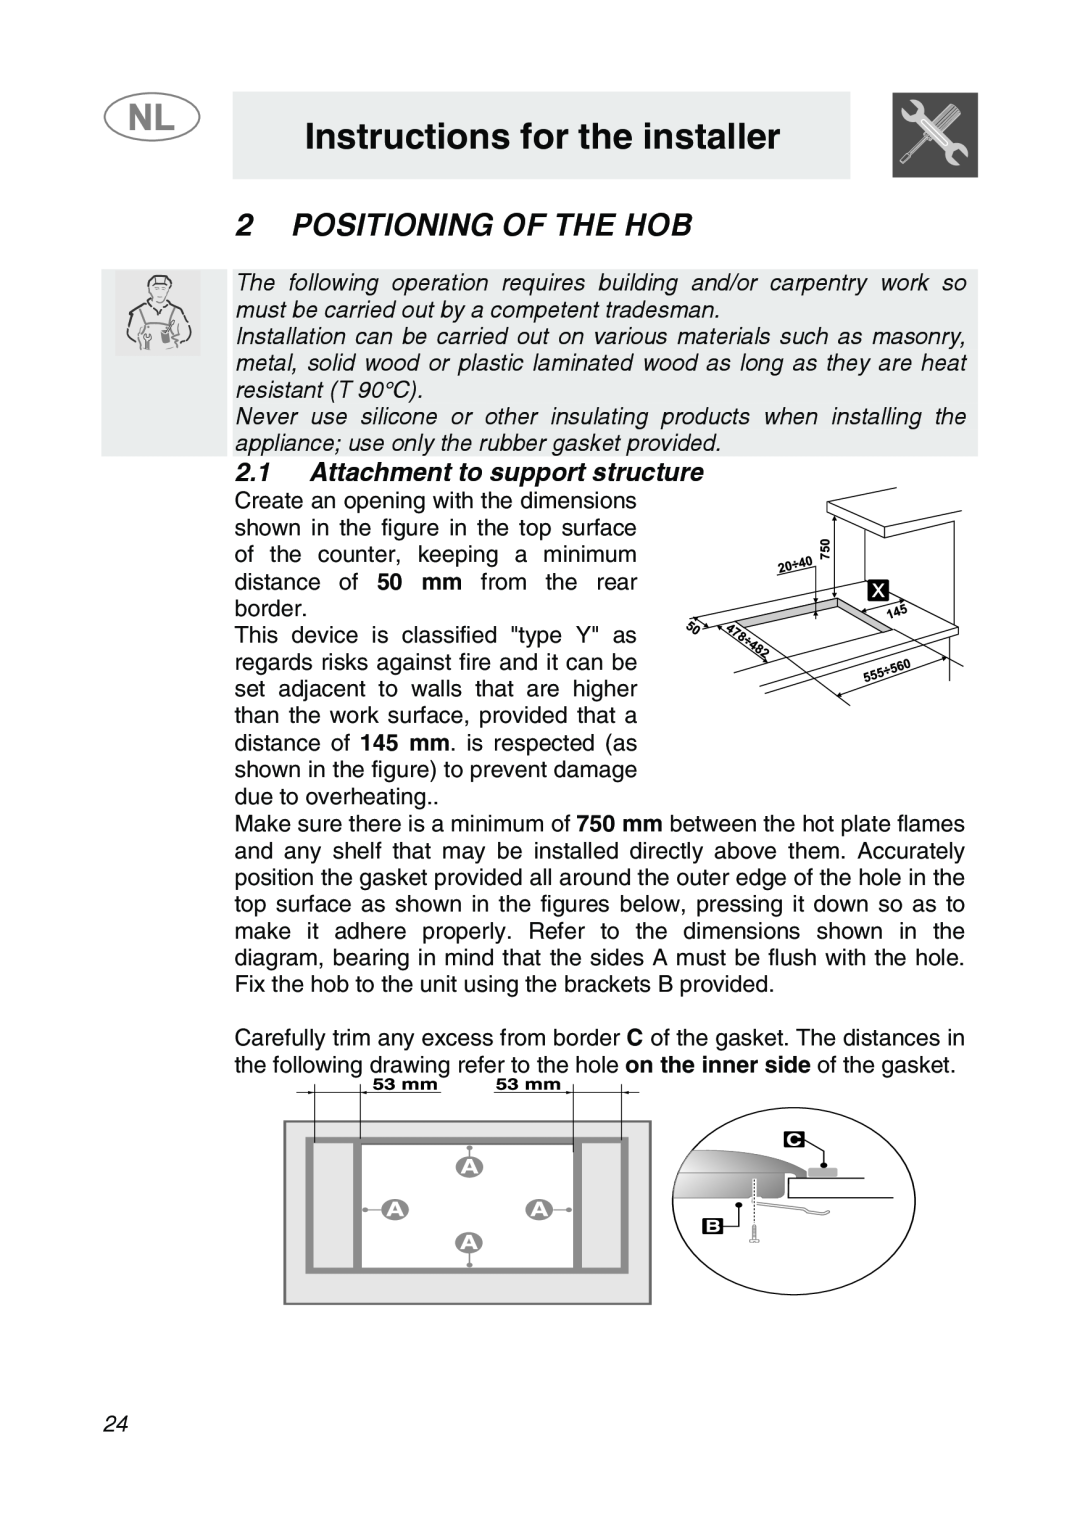 Smeg GKCO755, GKC755 manual Instructions for the installer, Positioning Of The Hob, 2.1Attachment to support structure 